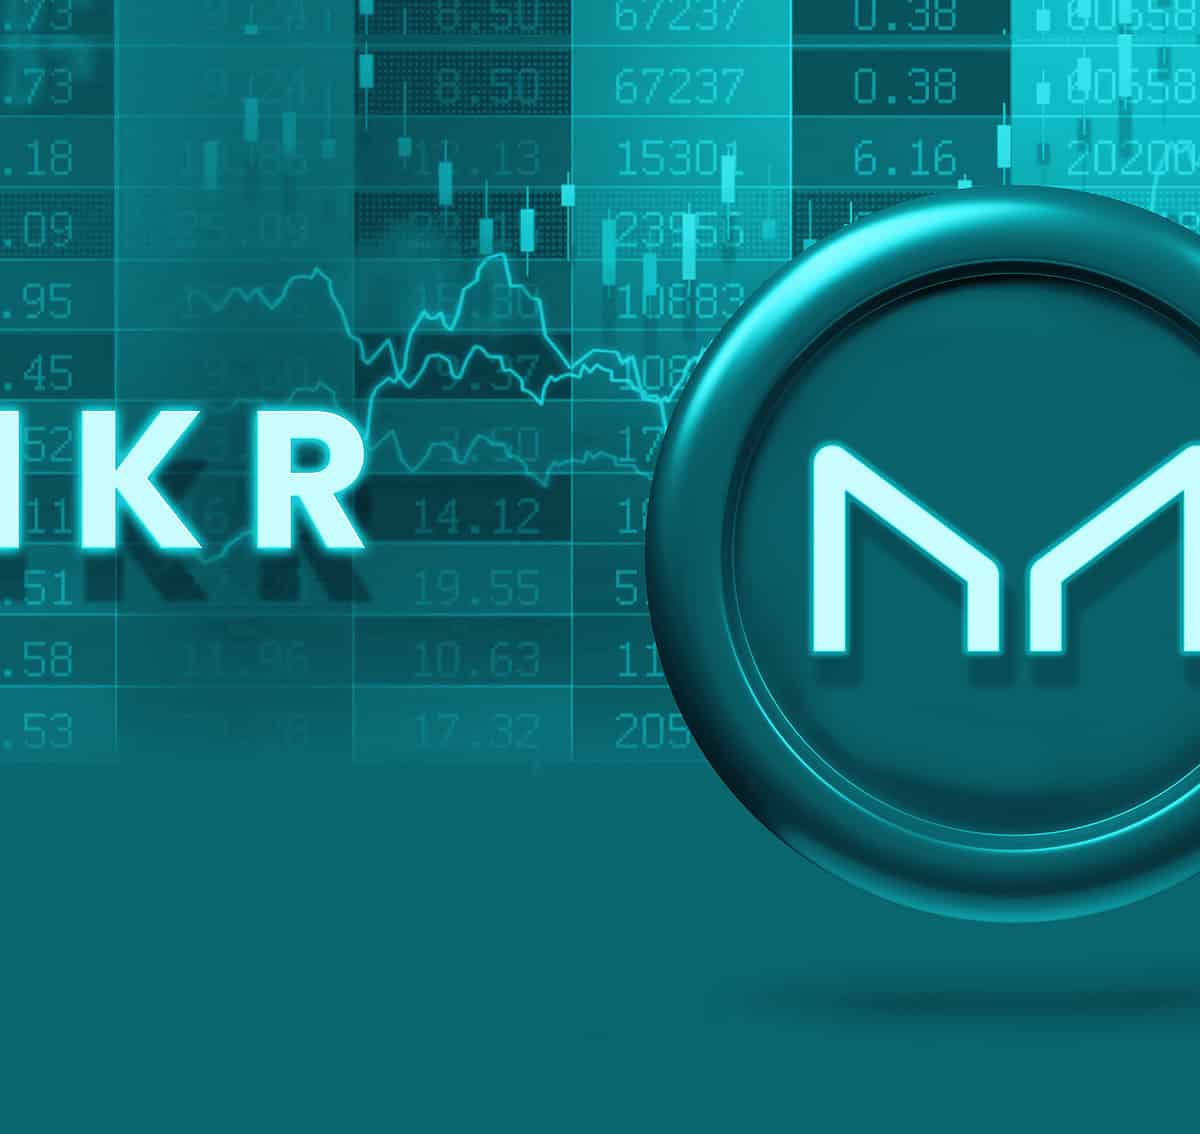 Maker (MKR) Soars With A Whopping 45% Weekly Surge - Here's Why